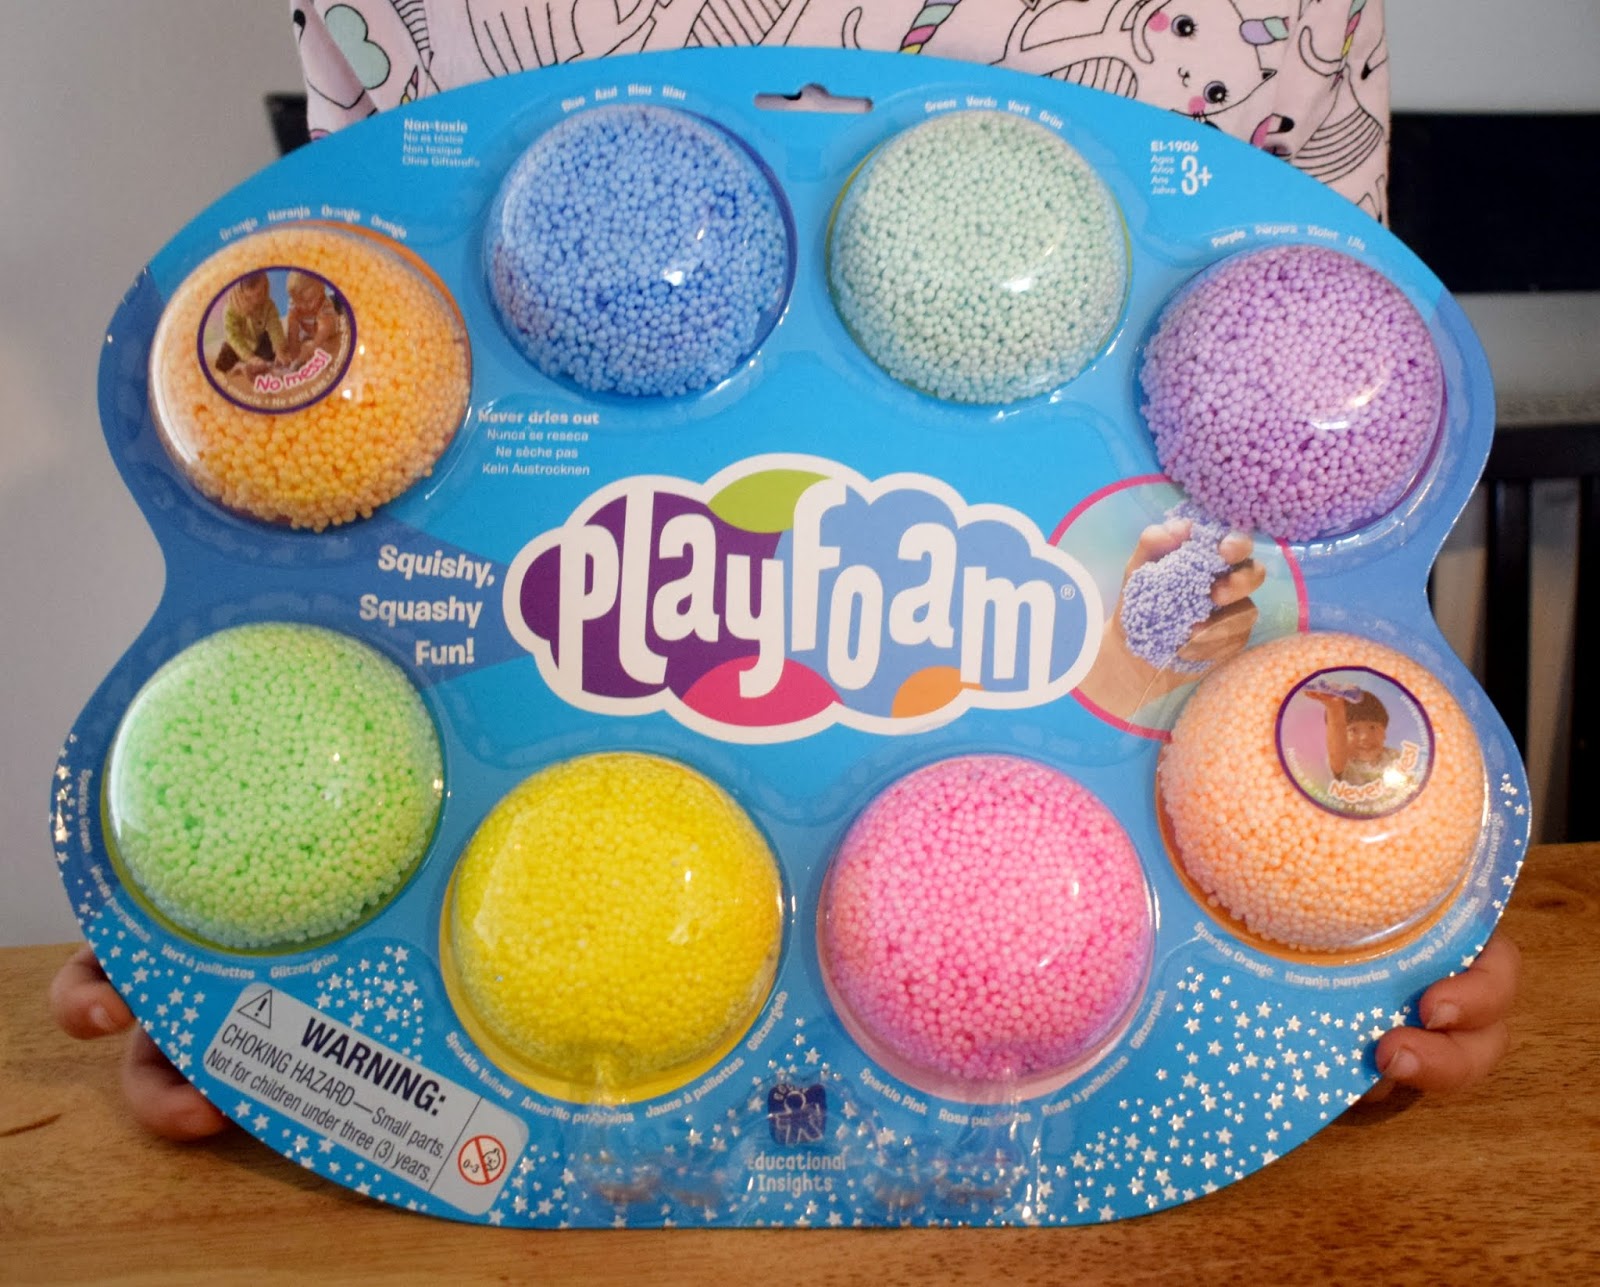 PlayFoam Provides Less Mess with More Fun